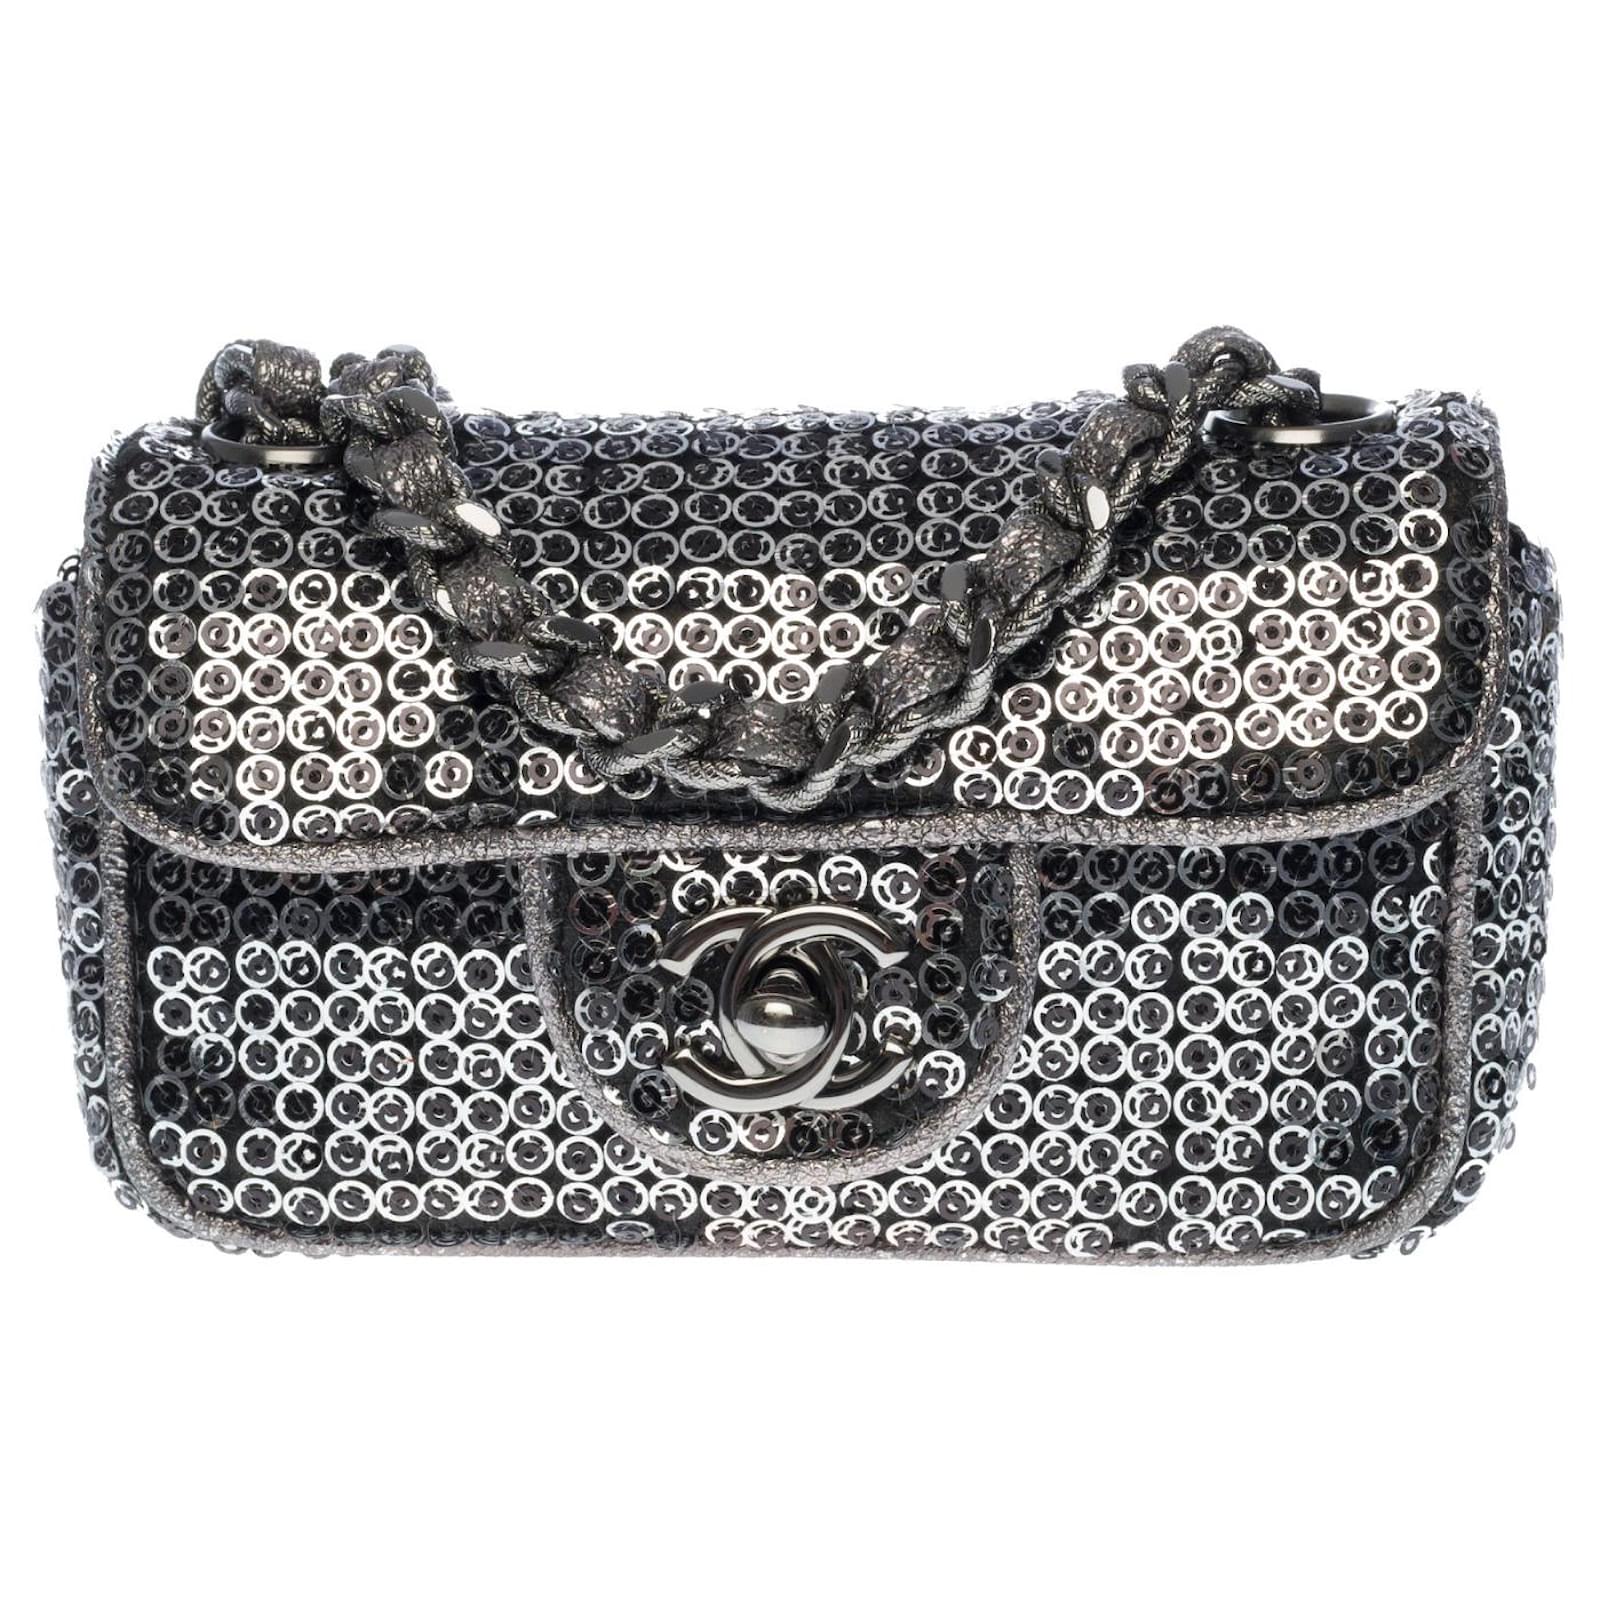 Timeless Extremely rare Chanel Mini Flap bag in silver embroidered